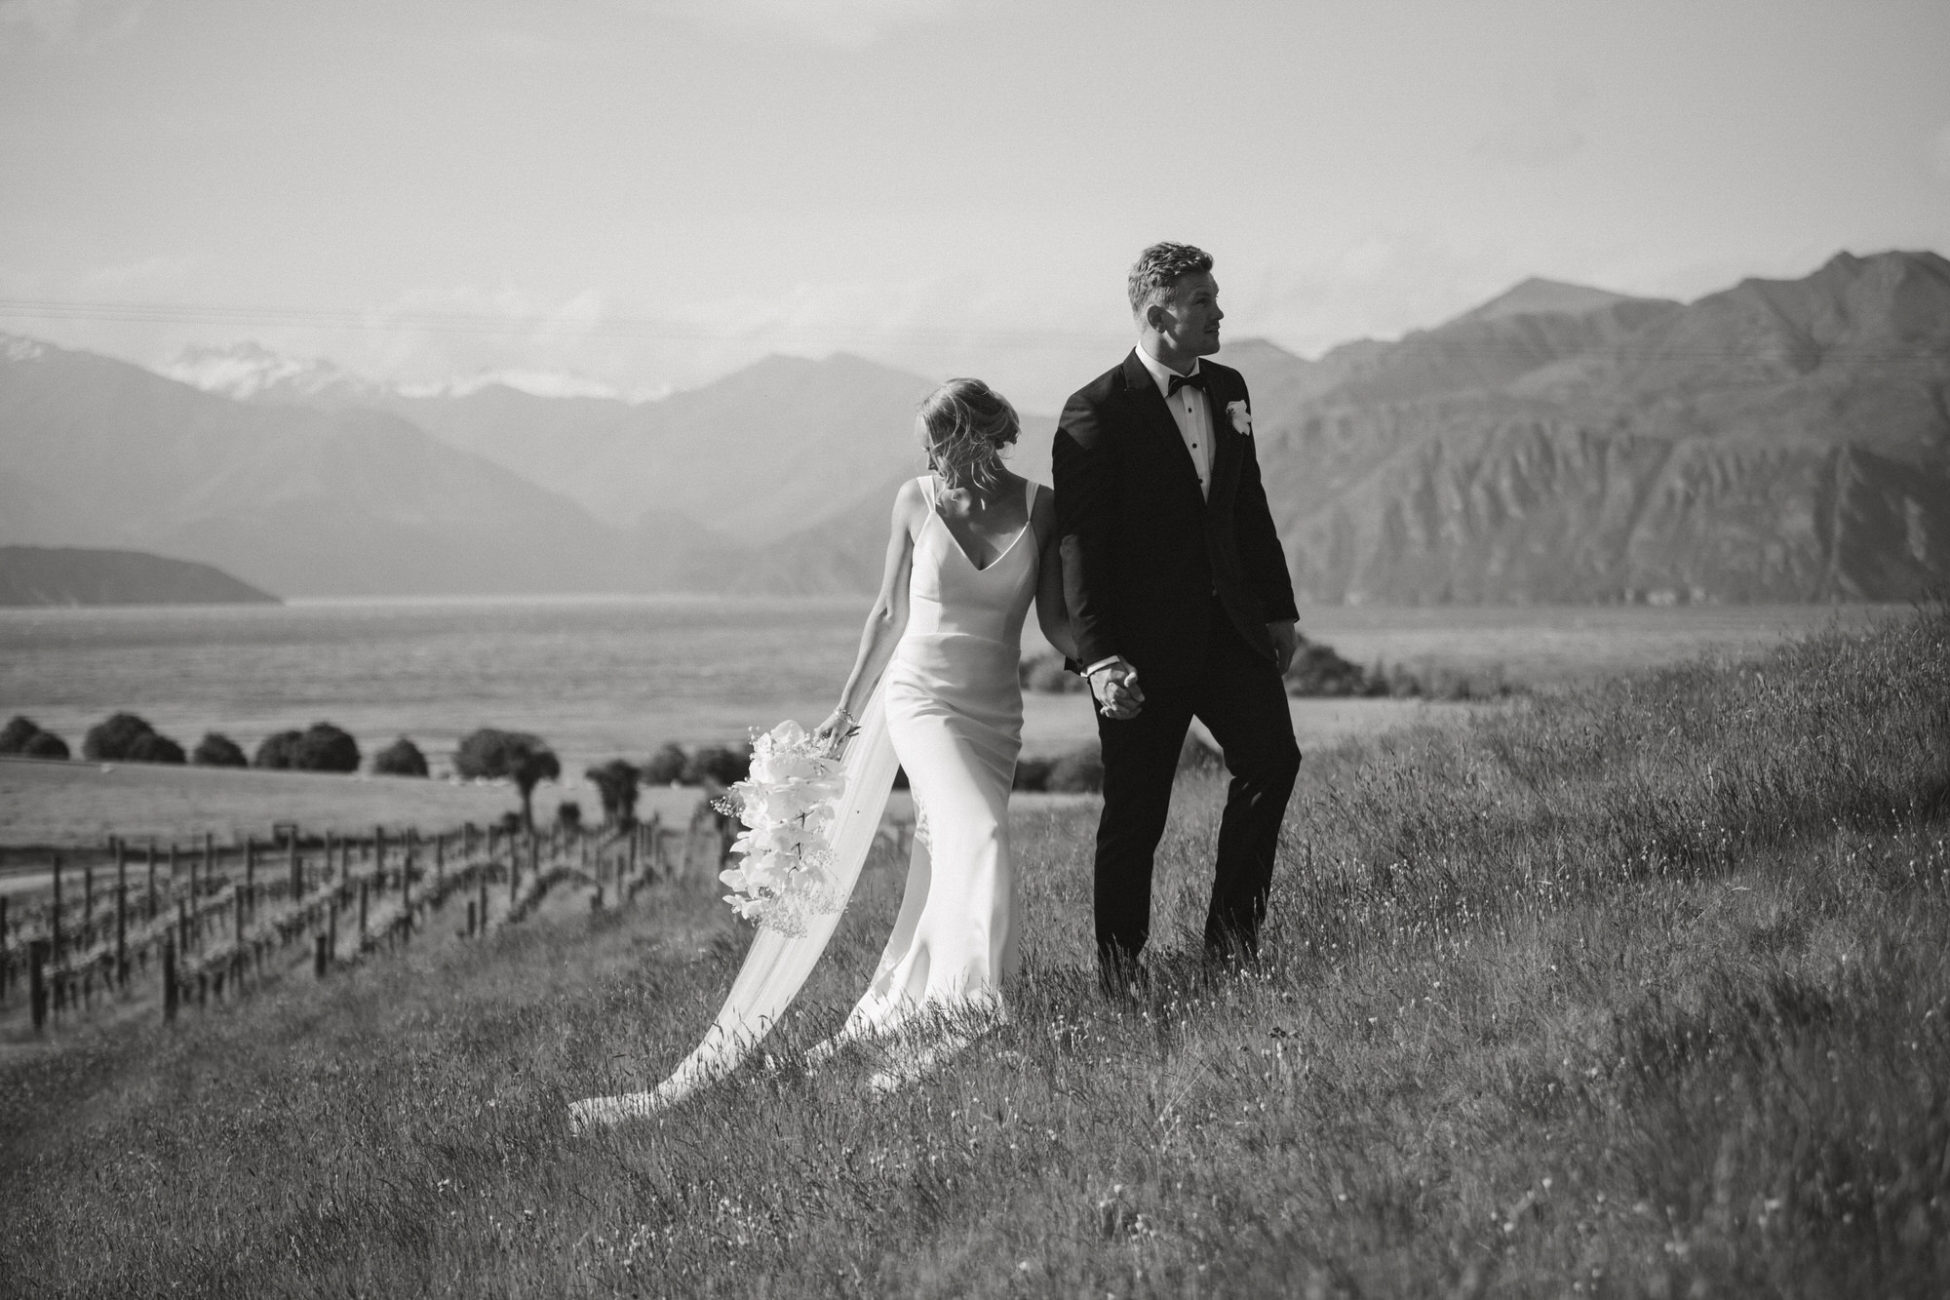 James and Alice holding hands and walking above the vineyard on their wedding day at Rippon Wedding venue in Wanaka